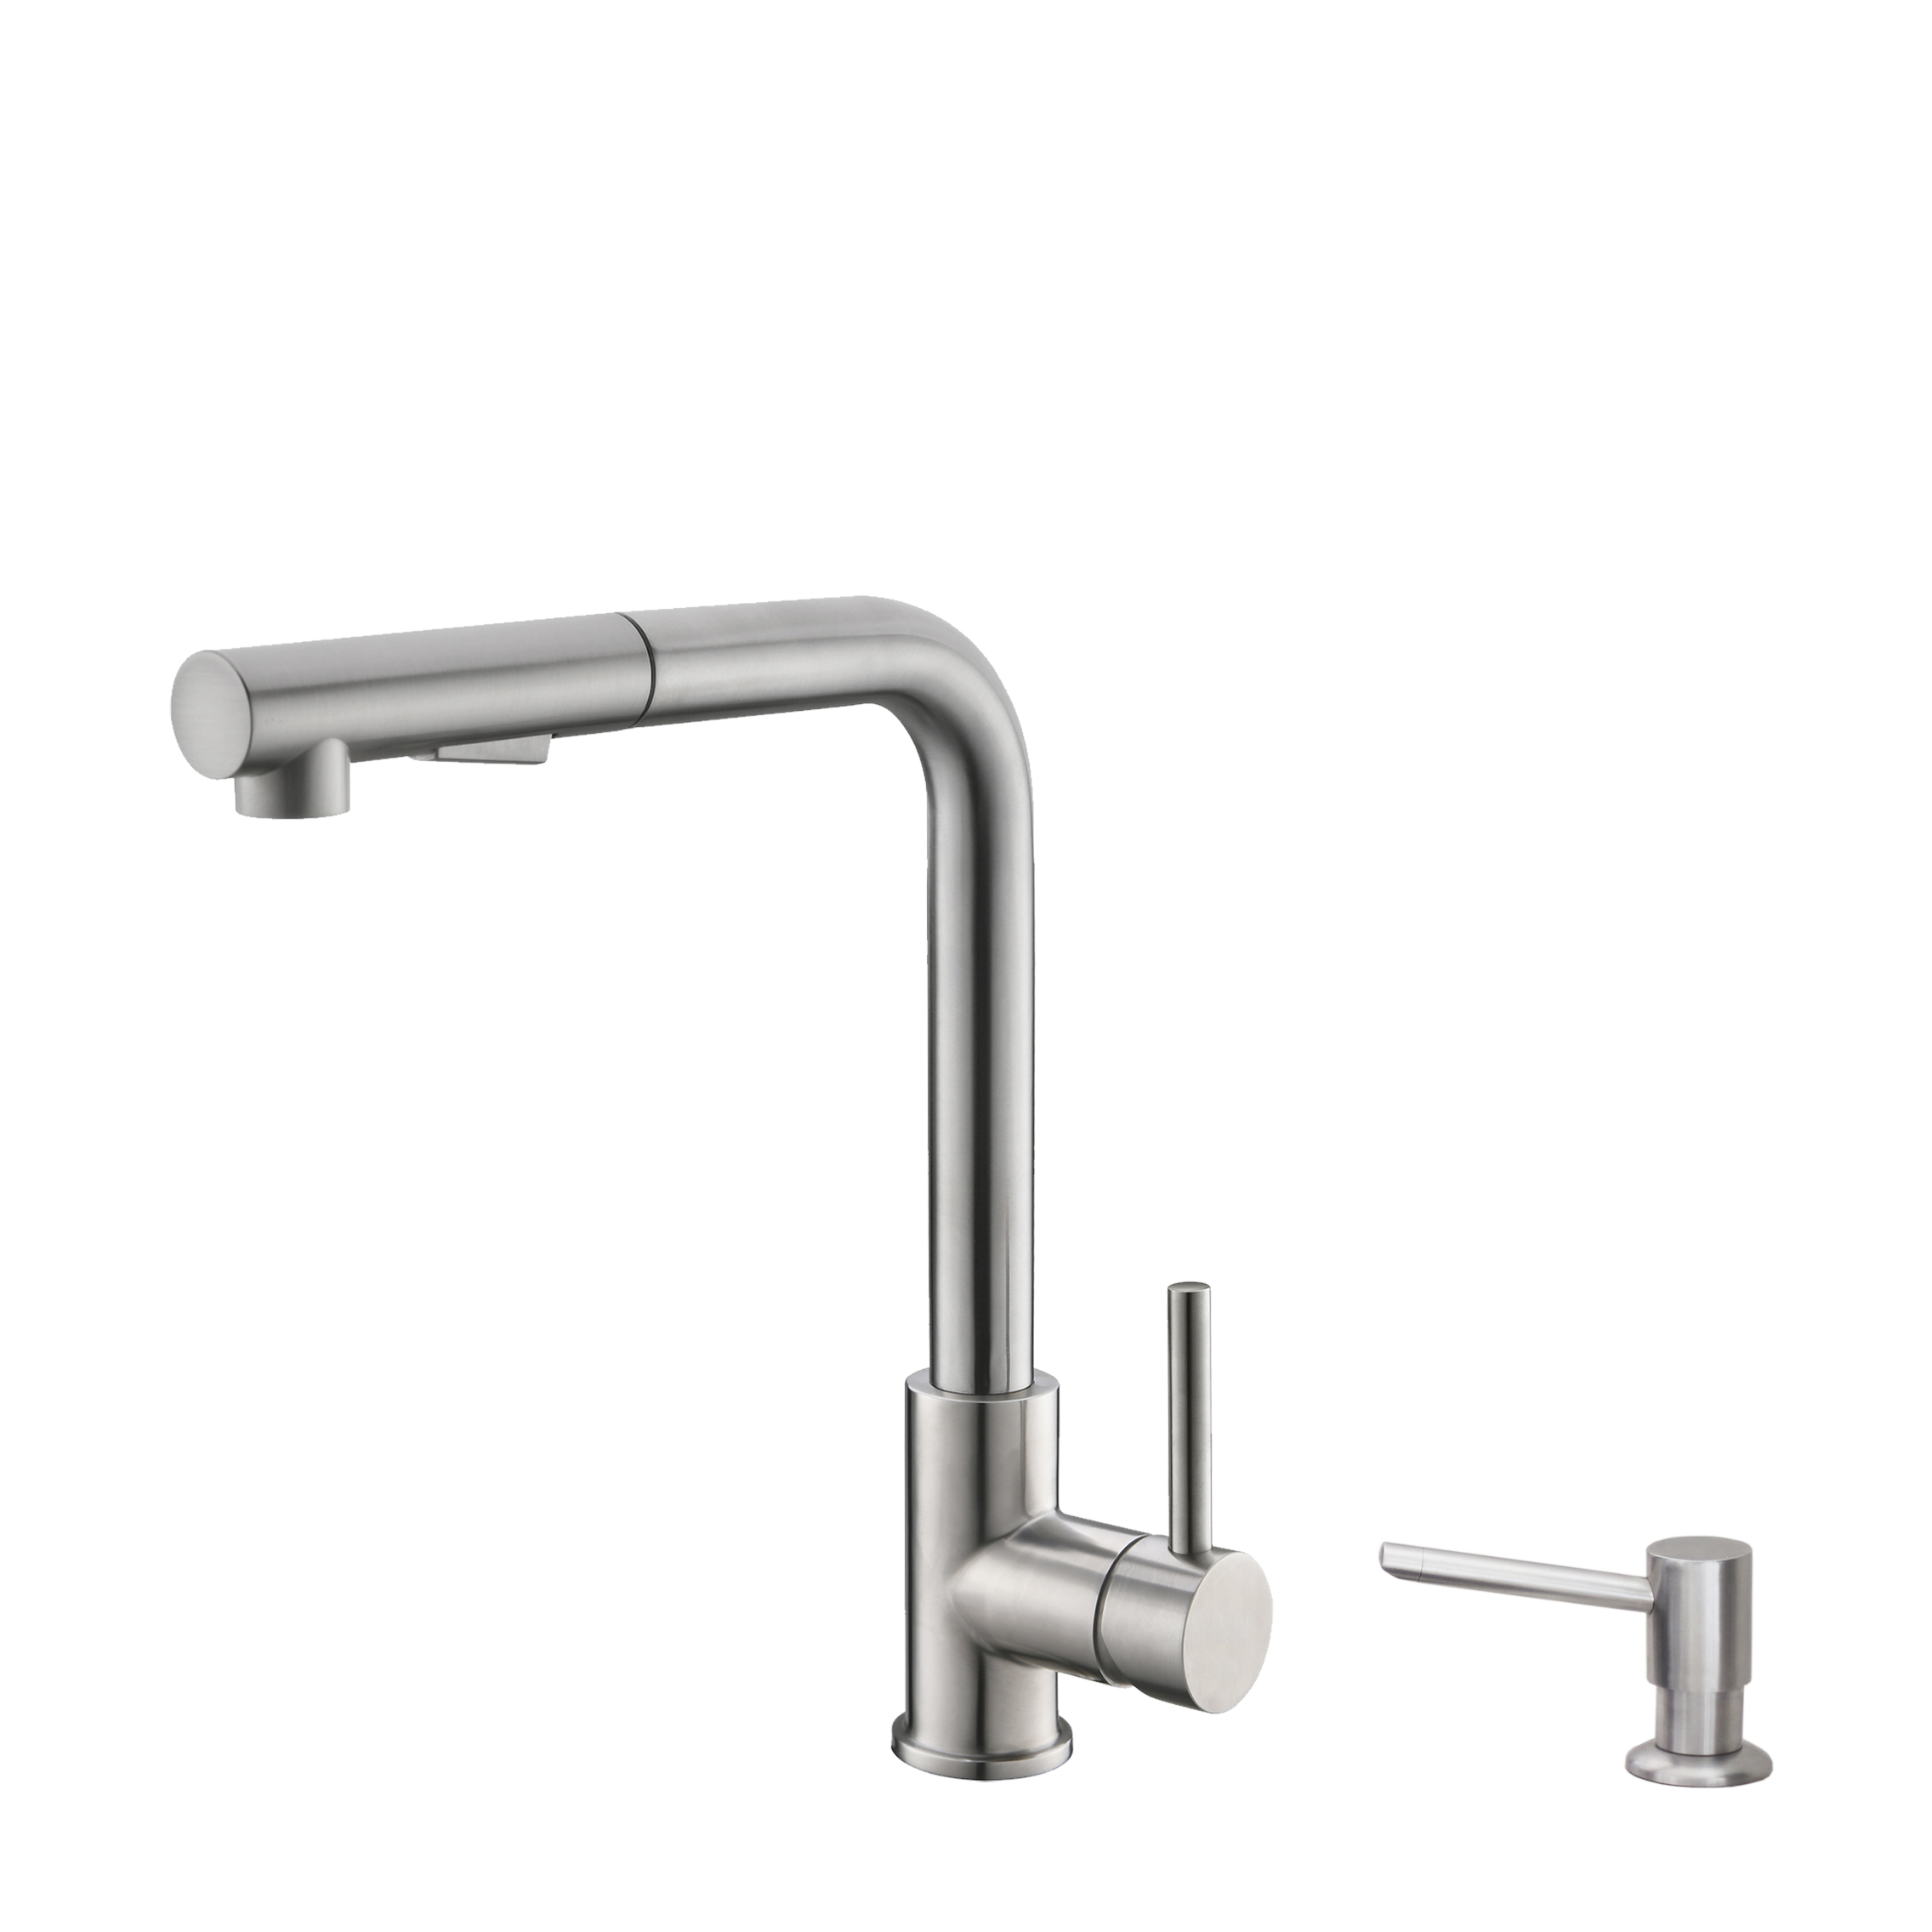 STYLISH K130S01 12 5/8 INCH STAINLESS STEEL PULL DOWN KITCHEN FAUCET WITH SOAP DISPENSER